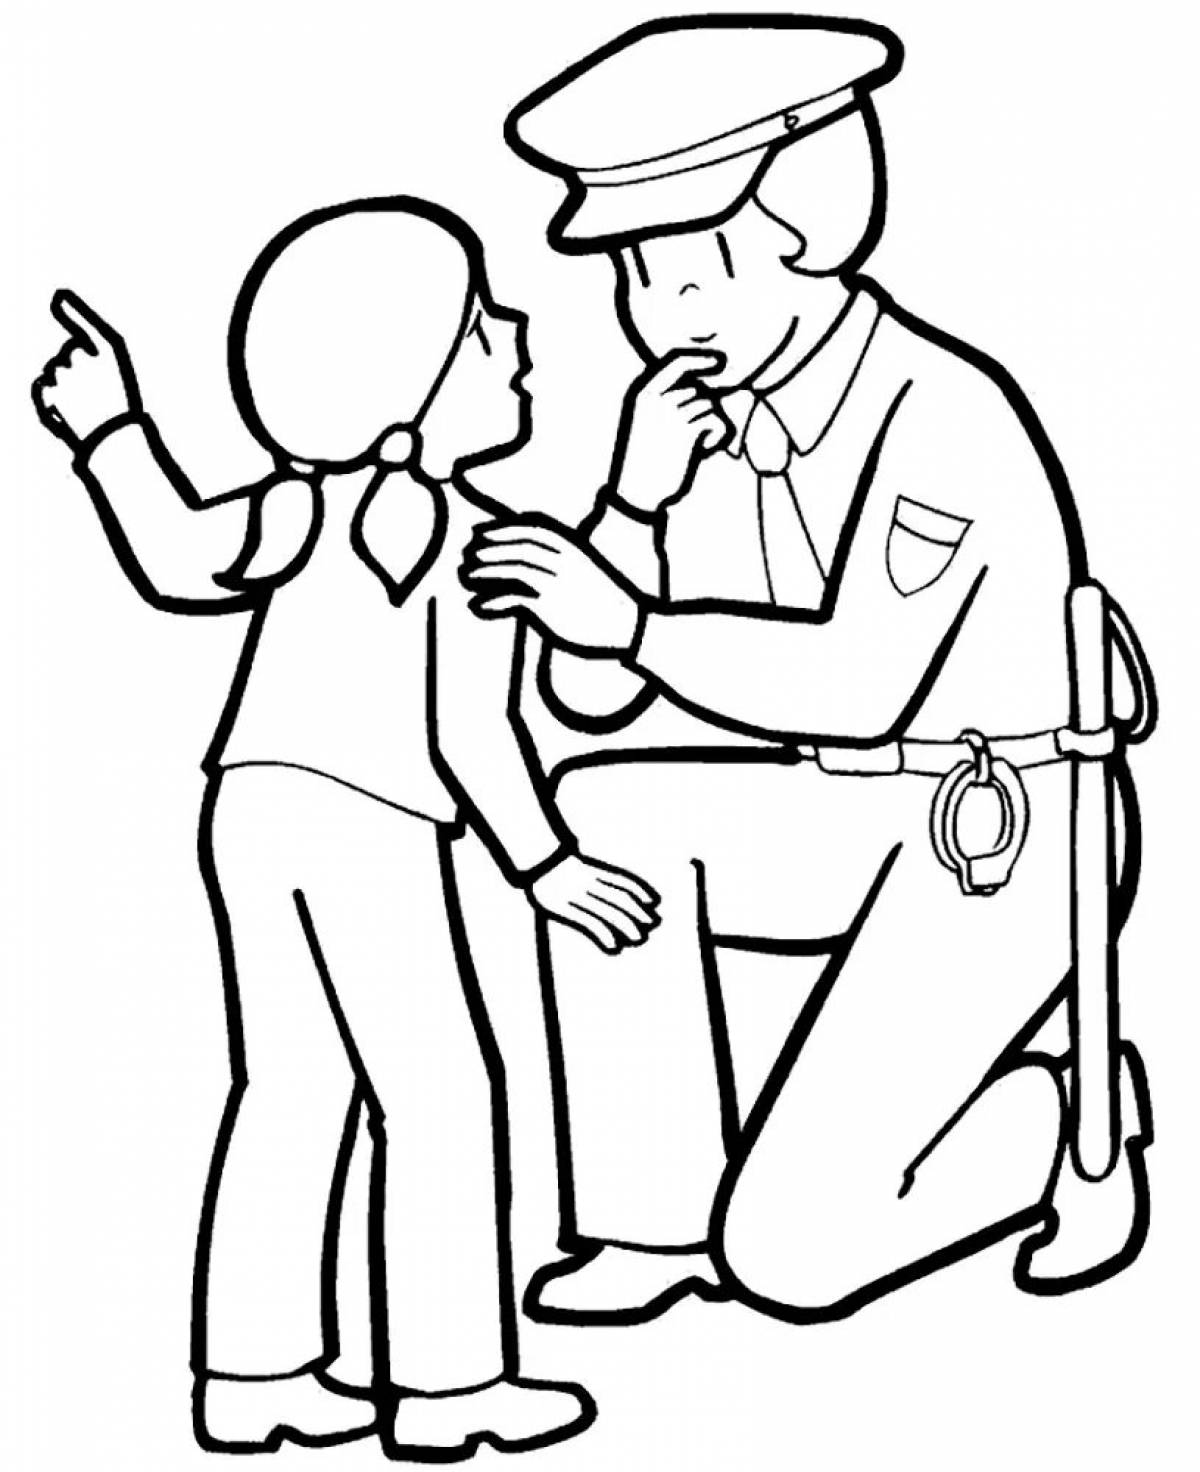 Jolly Russian police coloring book